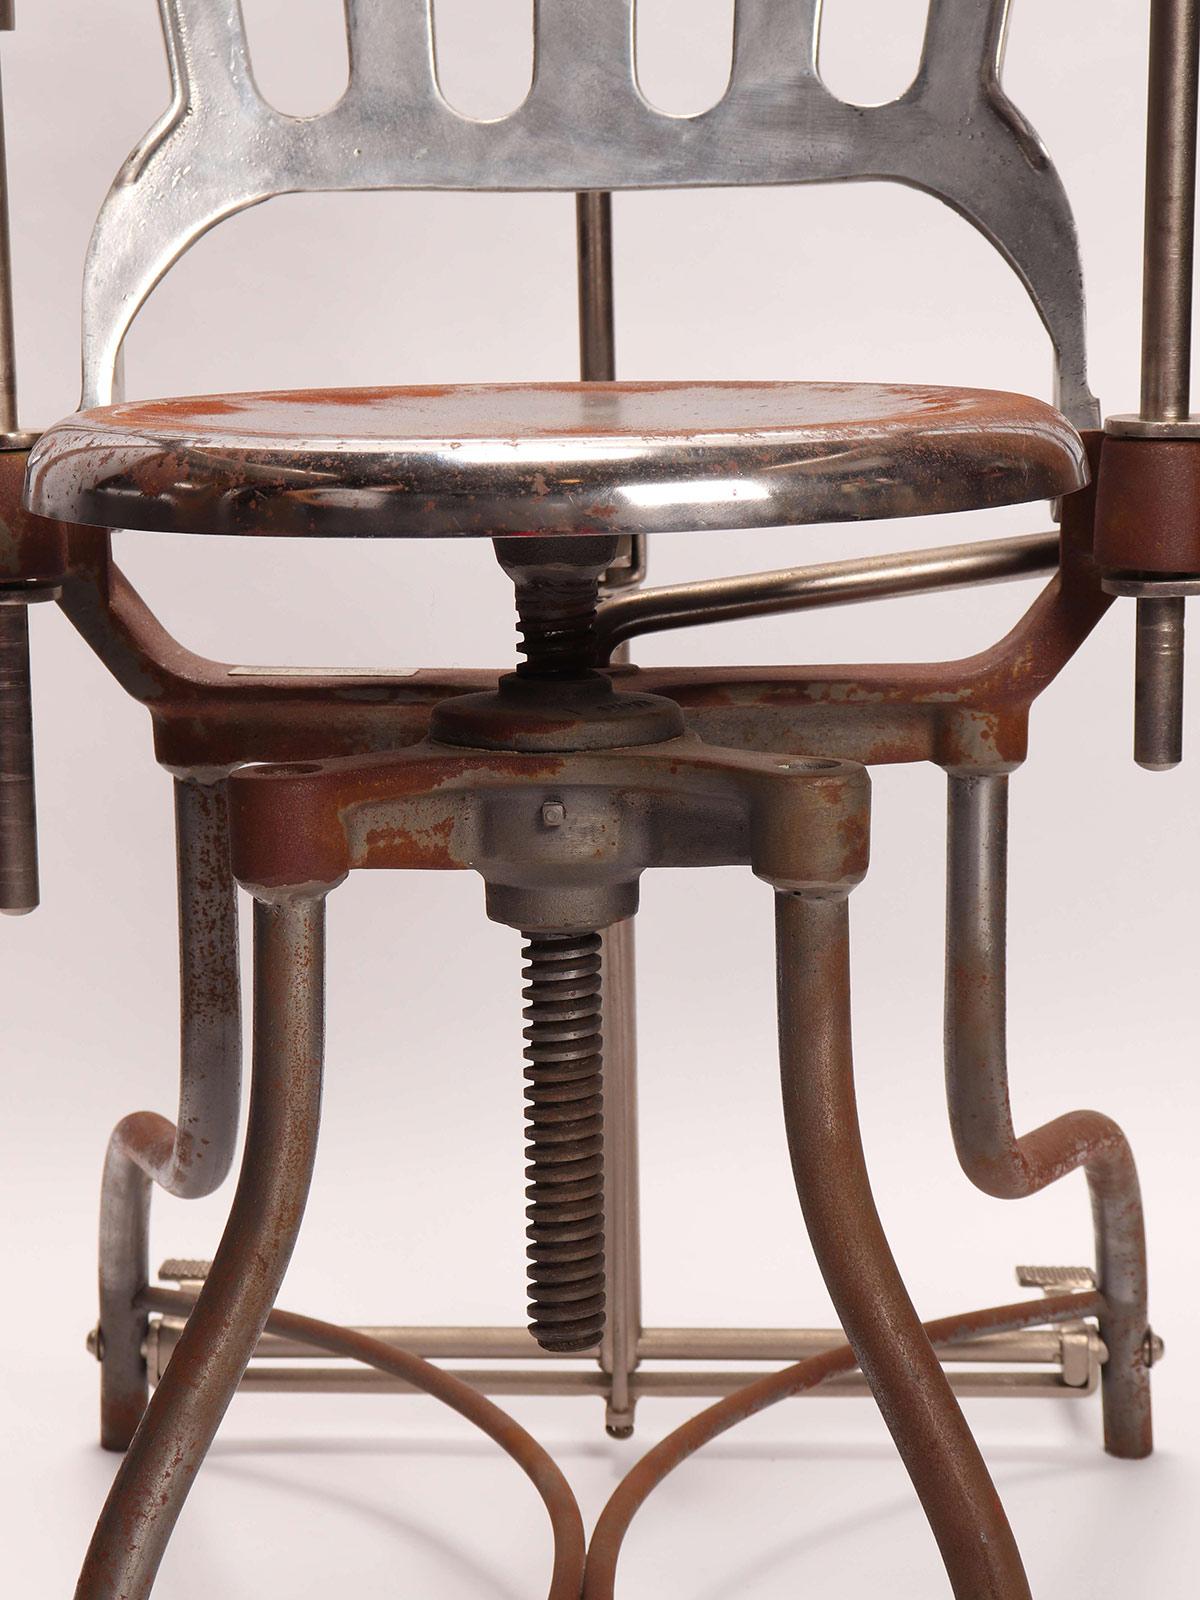 A stainless steel dentist’s armchair with a lamp. A reclining backrest, adjustable armrests, and adjustable headrest. Produced from A.S. Aloe Company, St. Louis, MO USA, circa 1920.